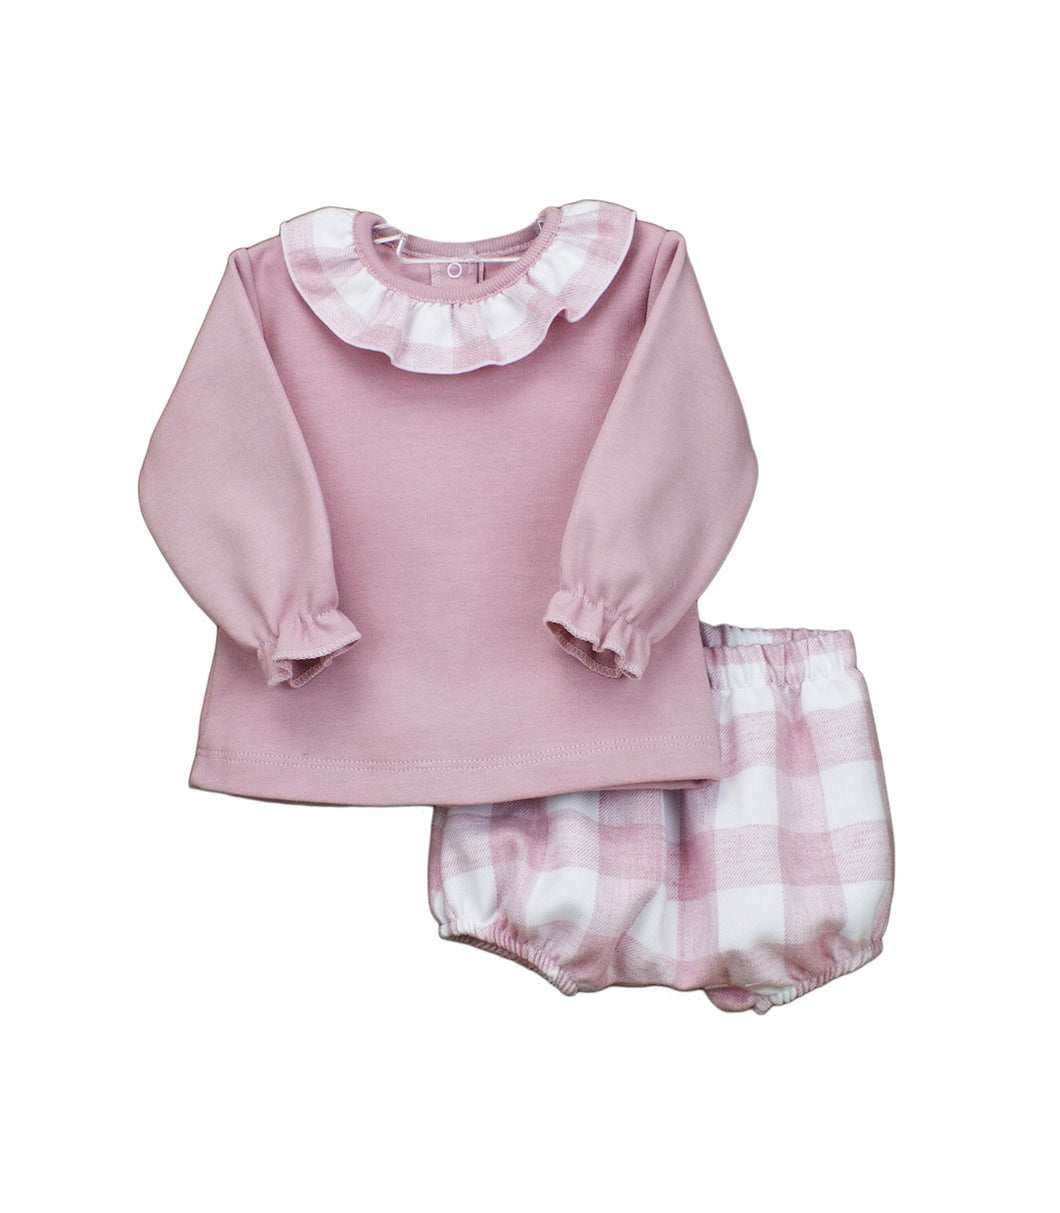 Baby Girls 2 Piece Shorts Set, Plain Long Sleeved Top with Contrasting Checked Fabric Frilled Collar with Checked Jam Pants in Soft Fabric